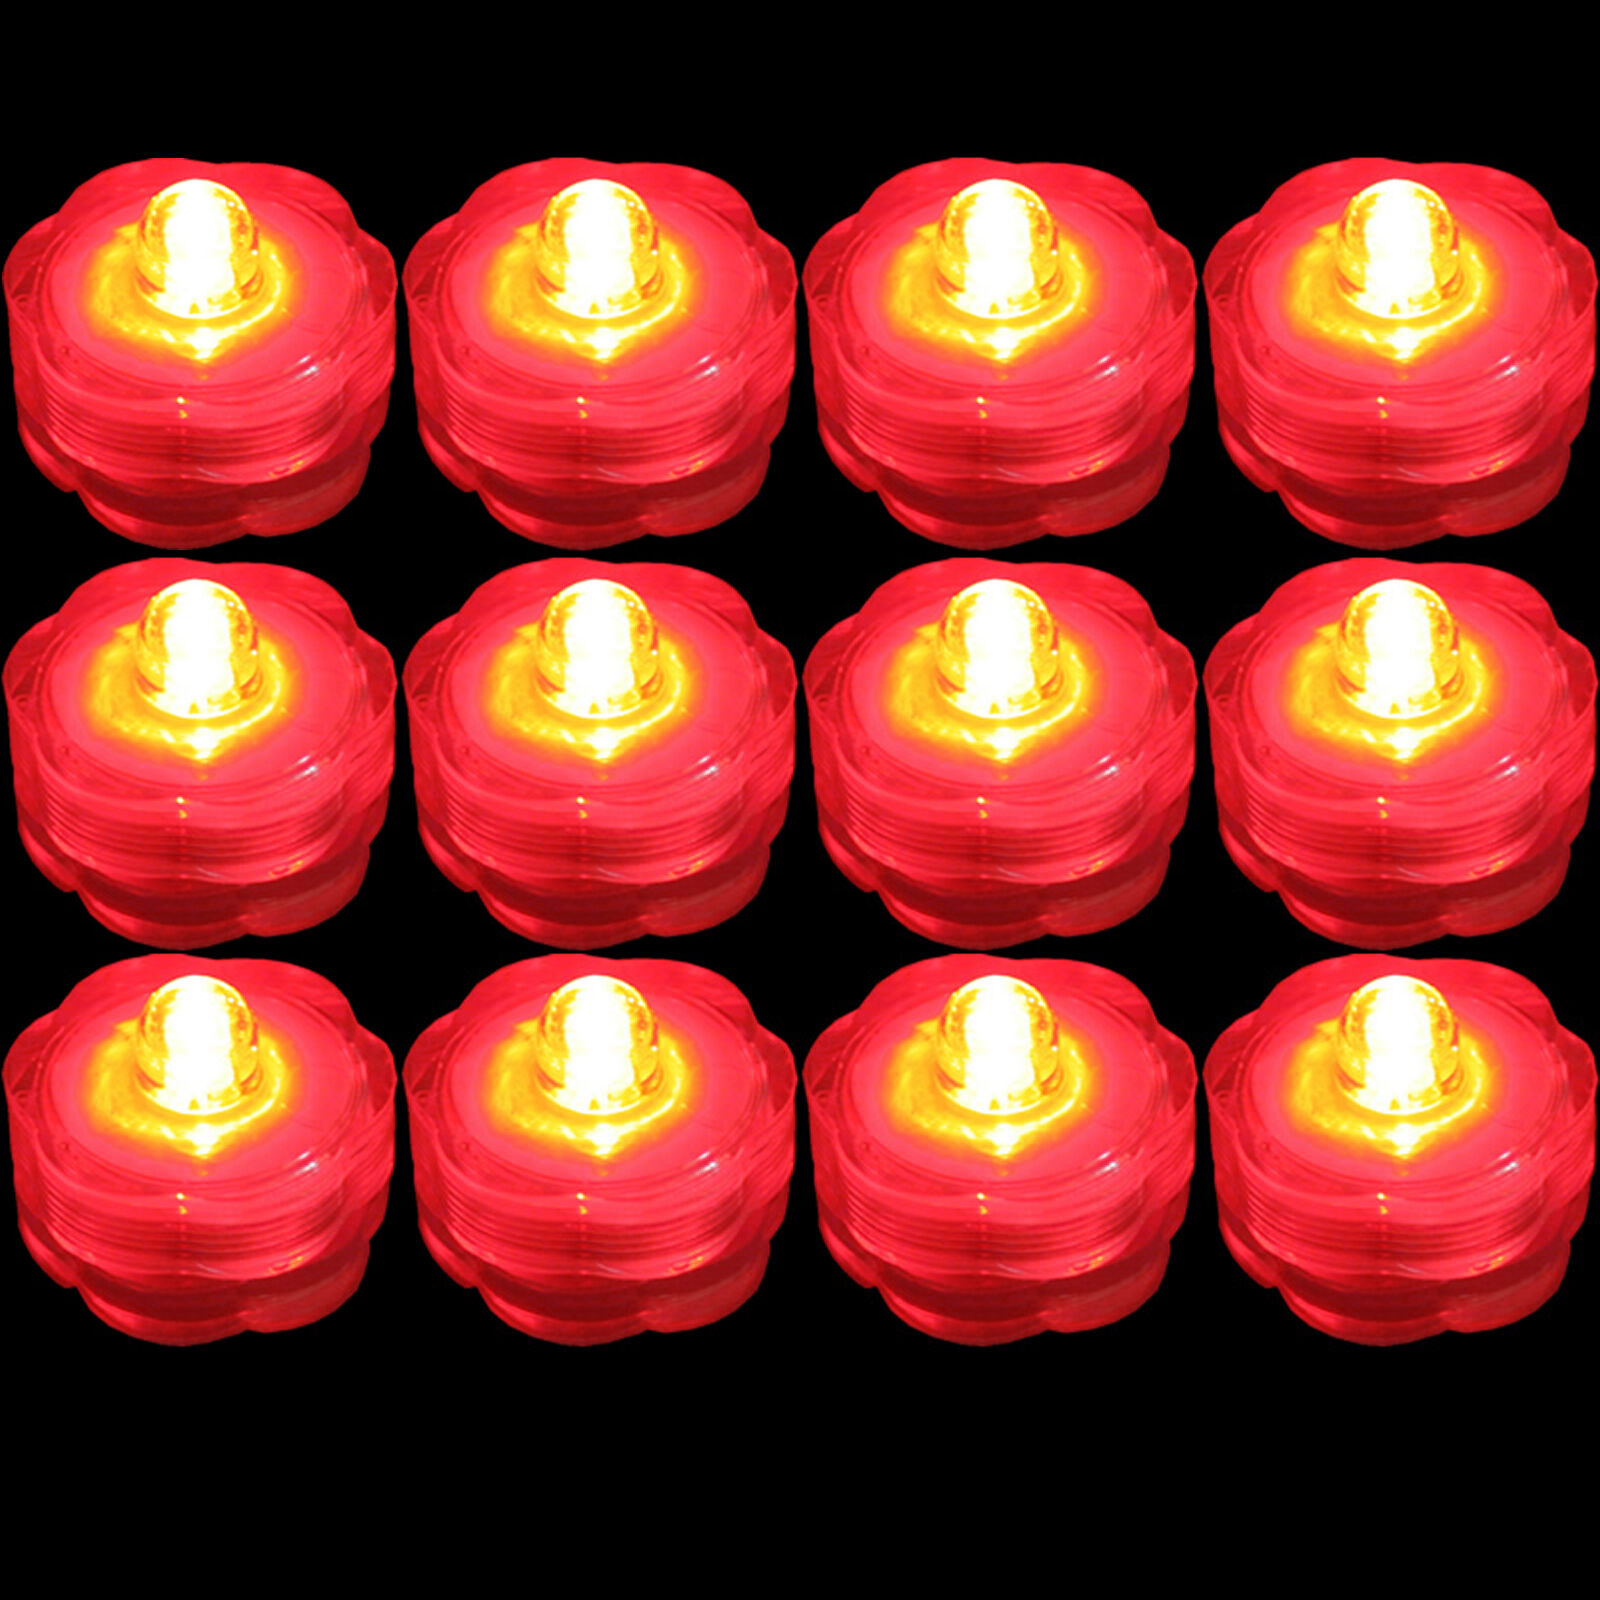 Submersible Waterproof Battery LED Tea Light ~ Wedding Decoration~Red~ 12 Pack